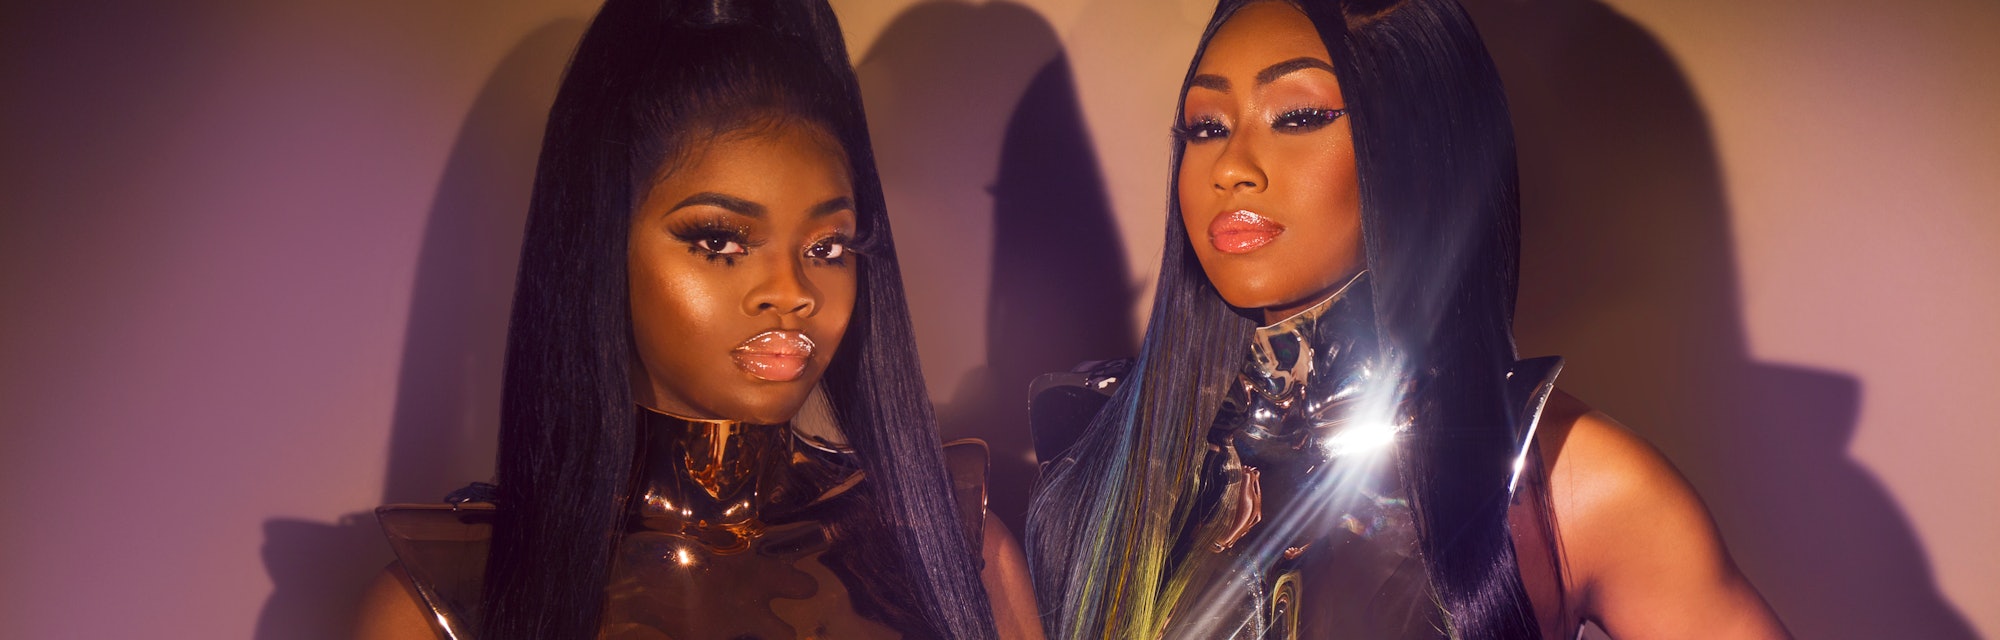 Yung Miami and JT from City Girls, Miami rap duo, posing in a golden armor